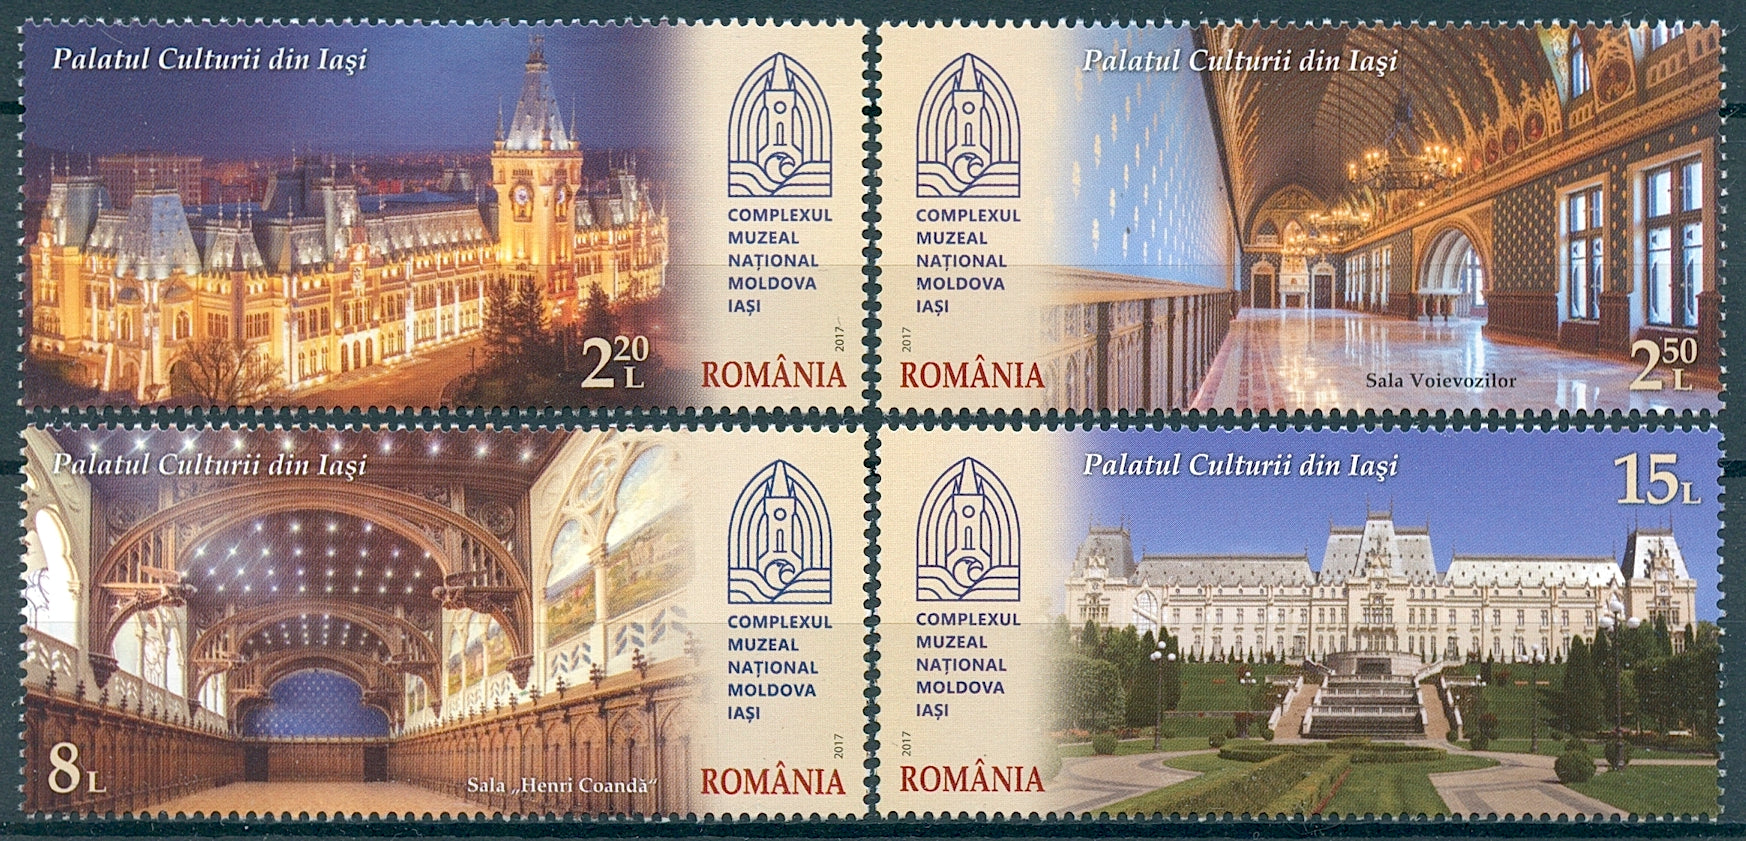 Romania 2017 MNH Palace of Culture Iasi 4v Set Architecture Palaces Stamps